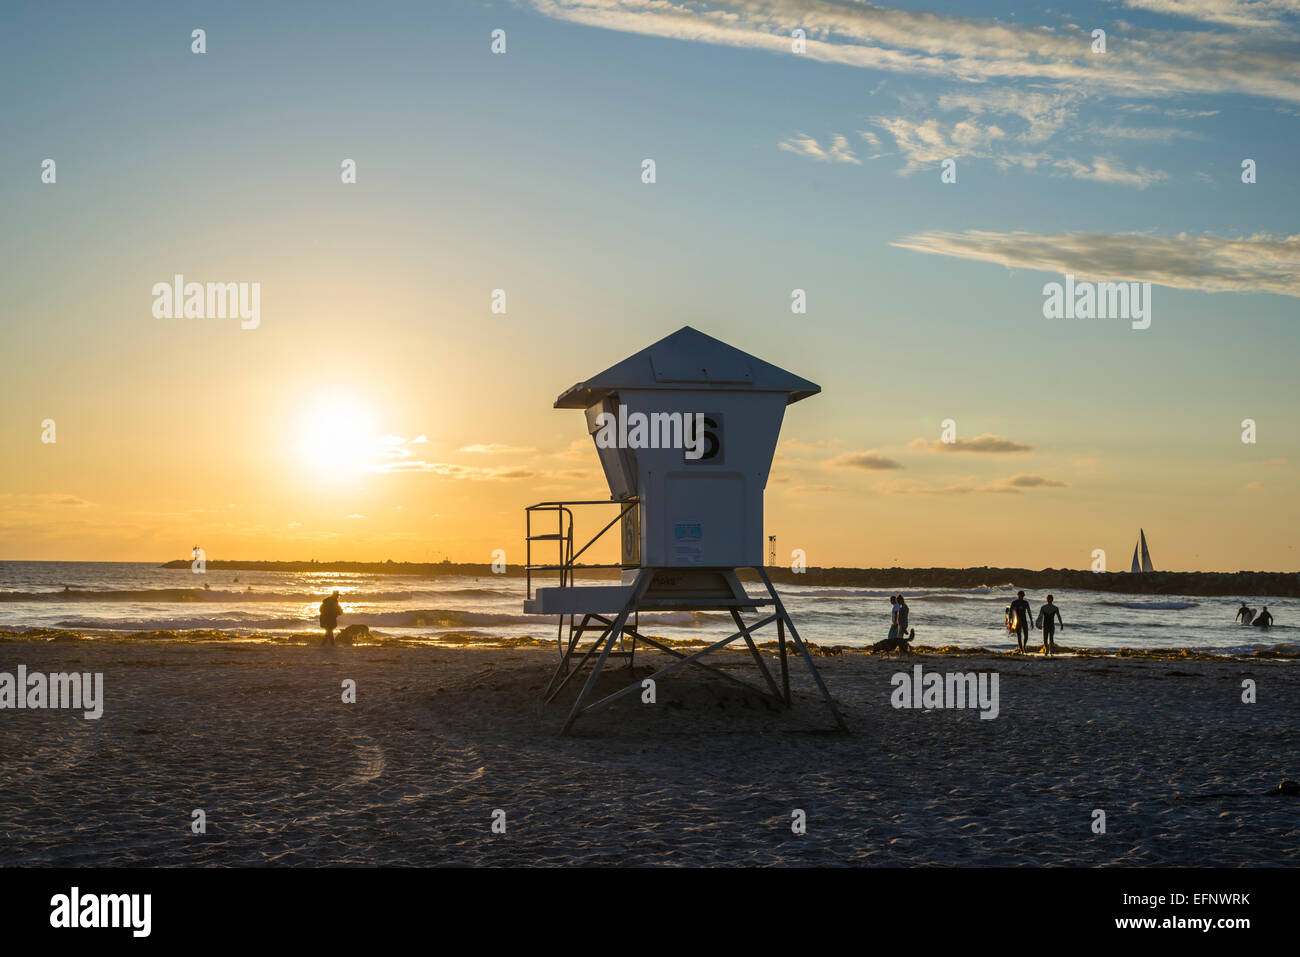 View of a lifeguard tower and people enjoying the sunset. Ocean Beach, San Diego, California, United States. Stock Photo